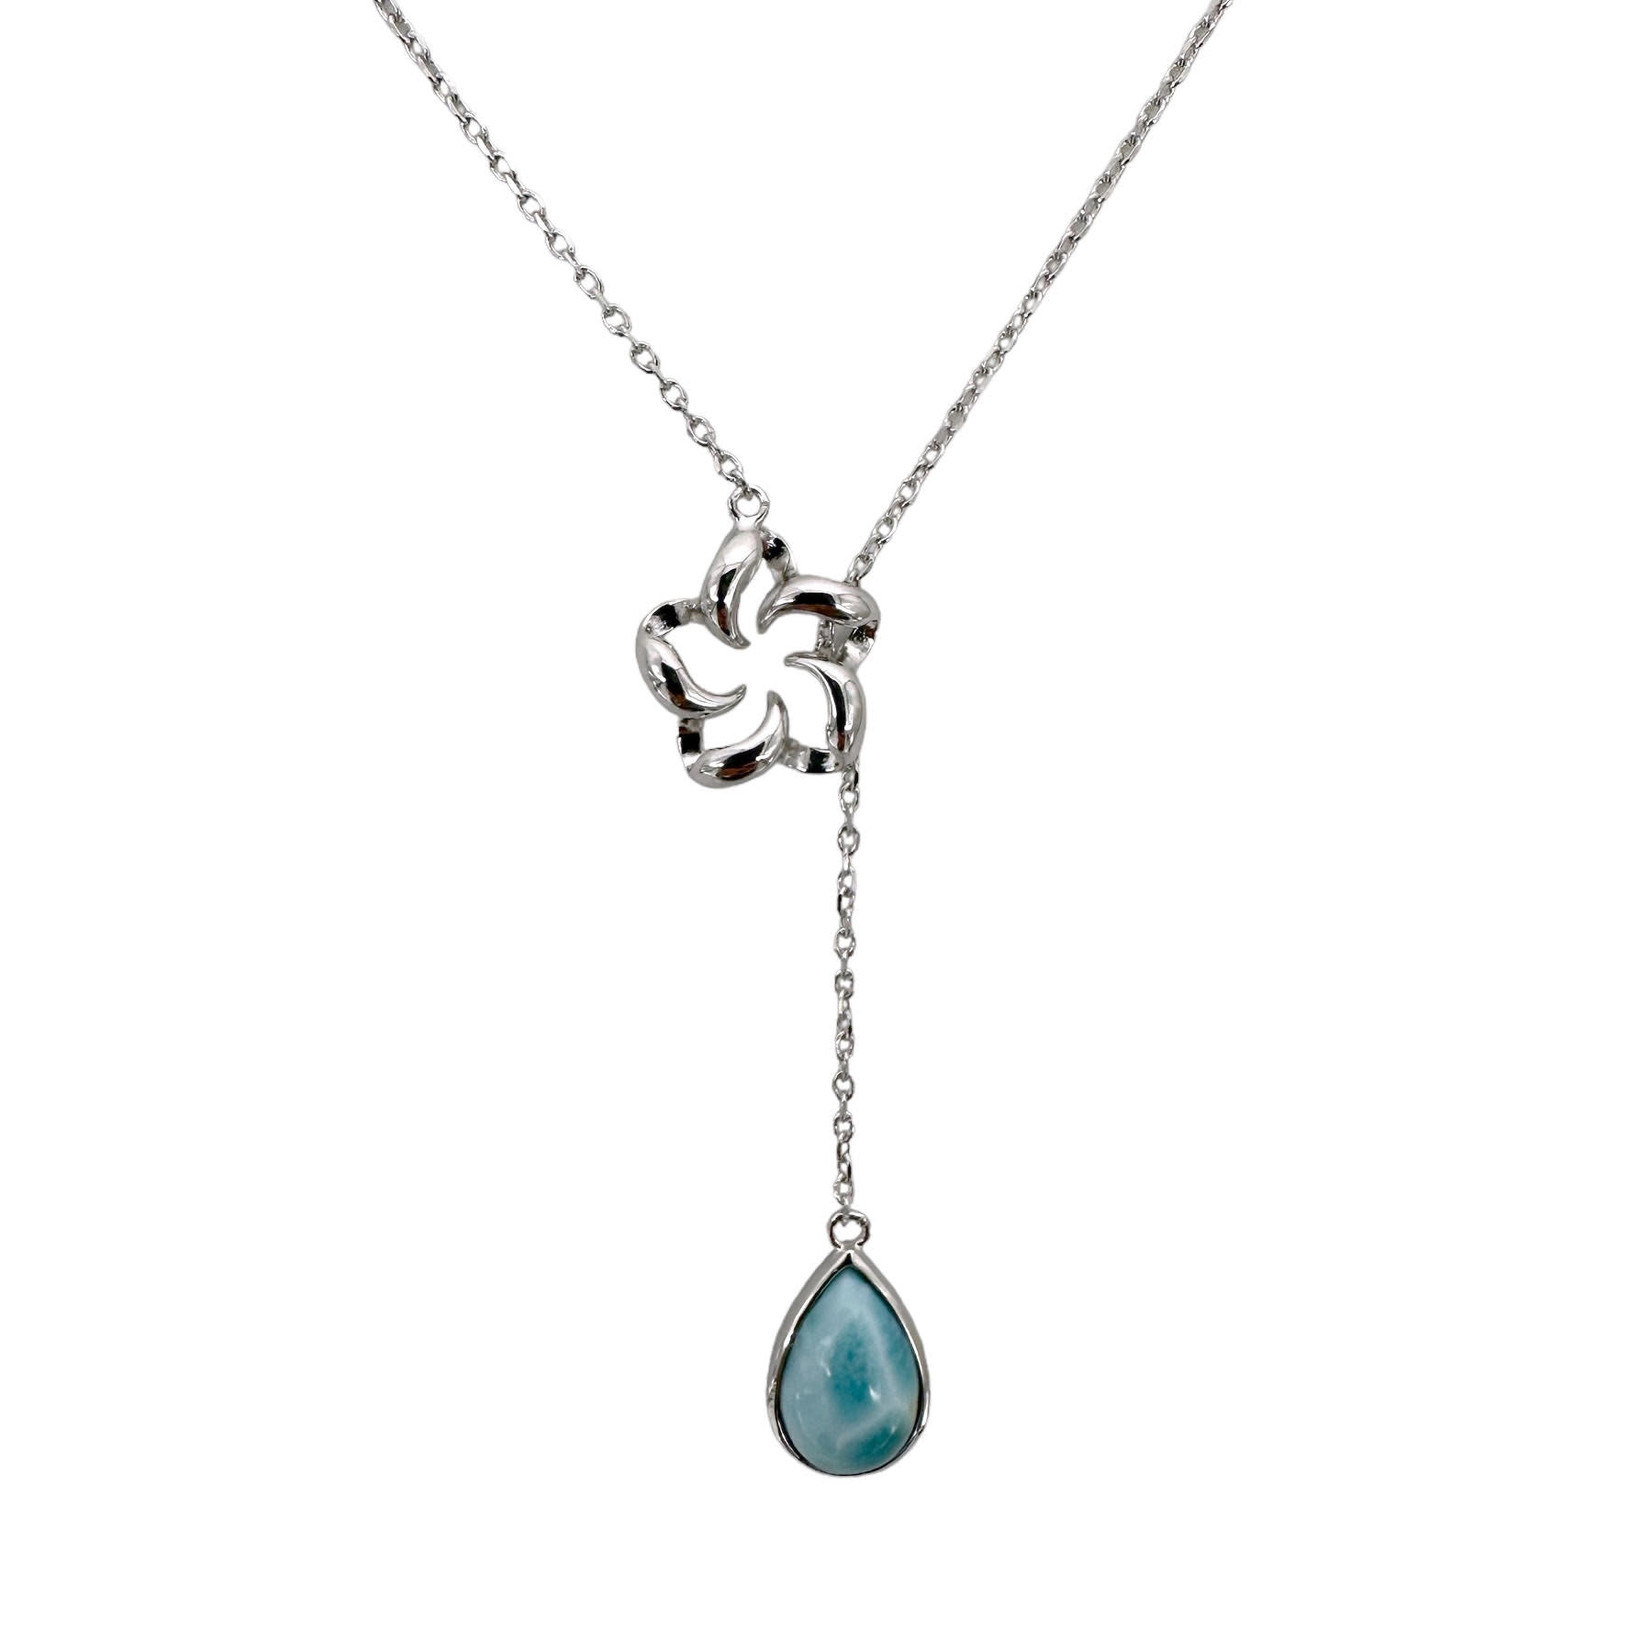 18" Sterling Silver Flower Necklace with Larimar Drop